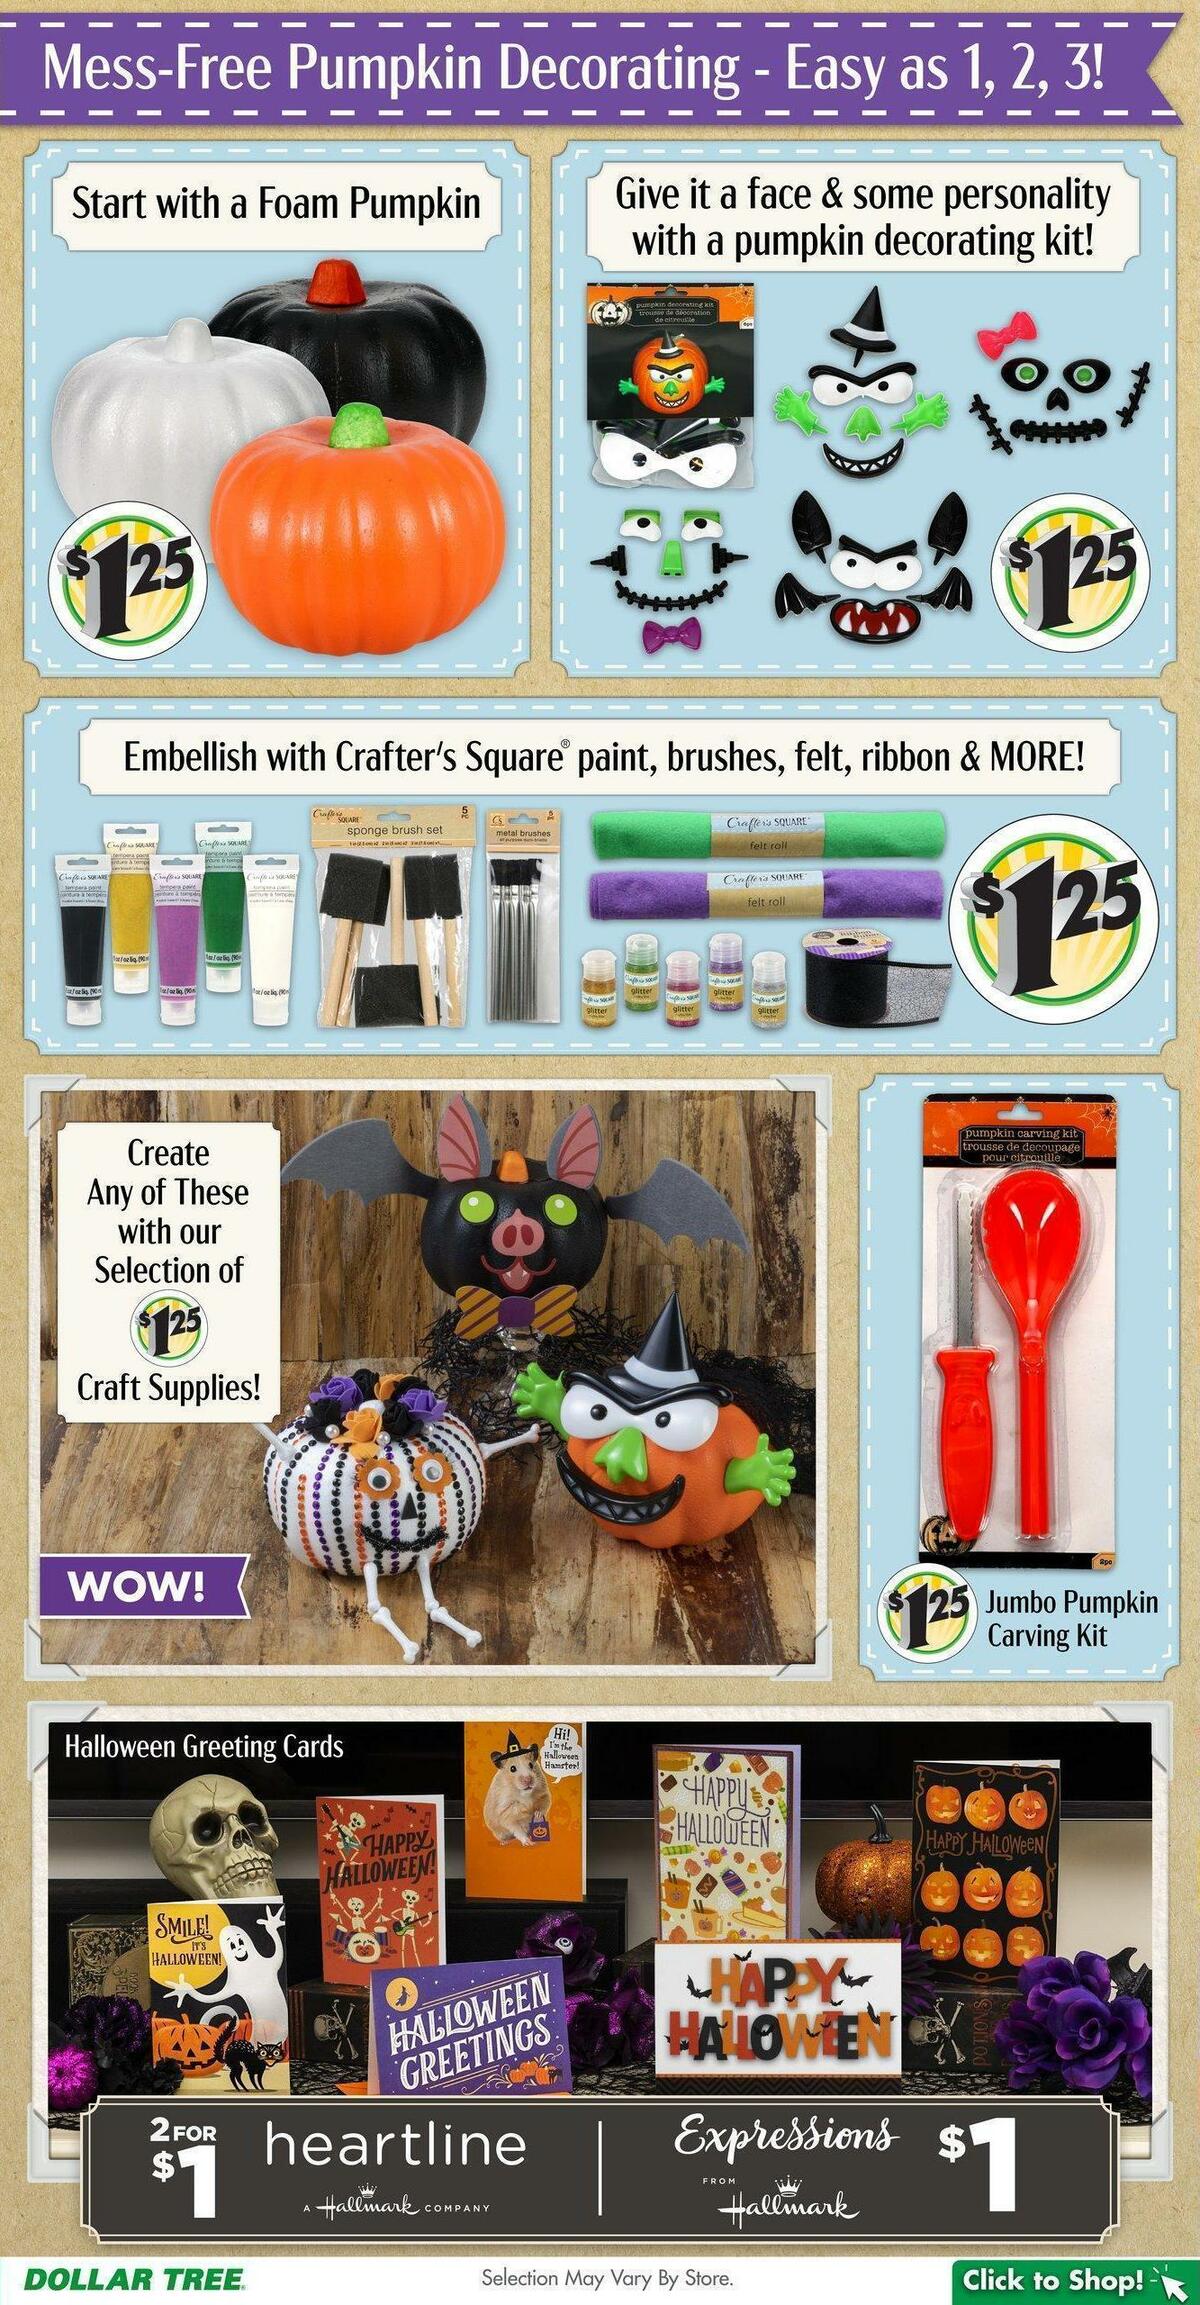 Dollar Tree Weekly Ad from September 25